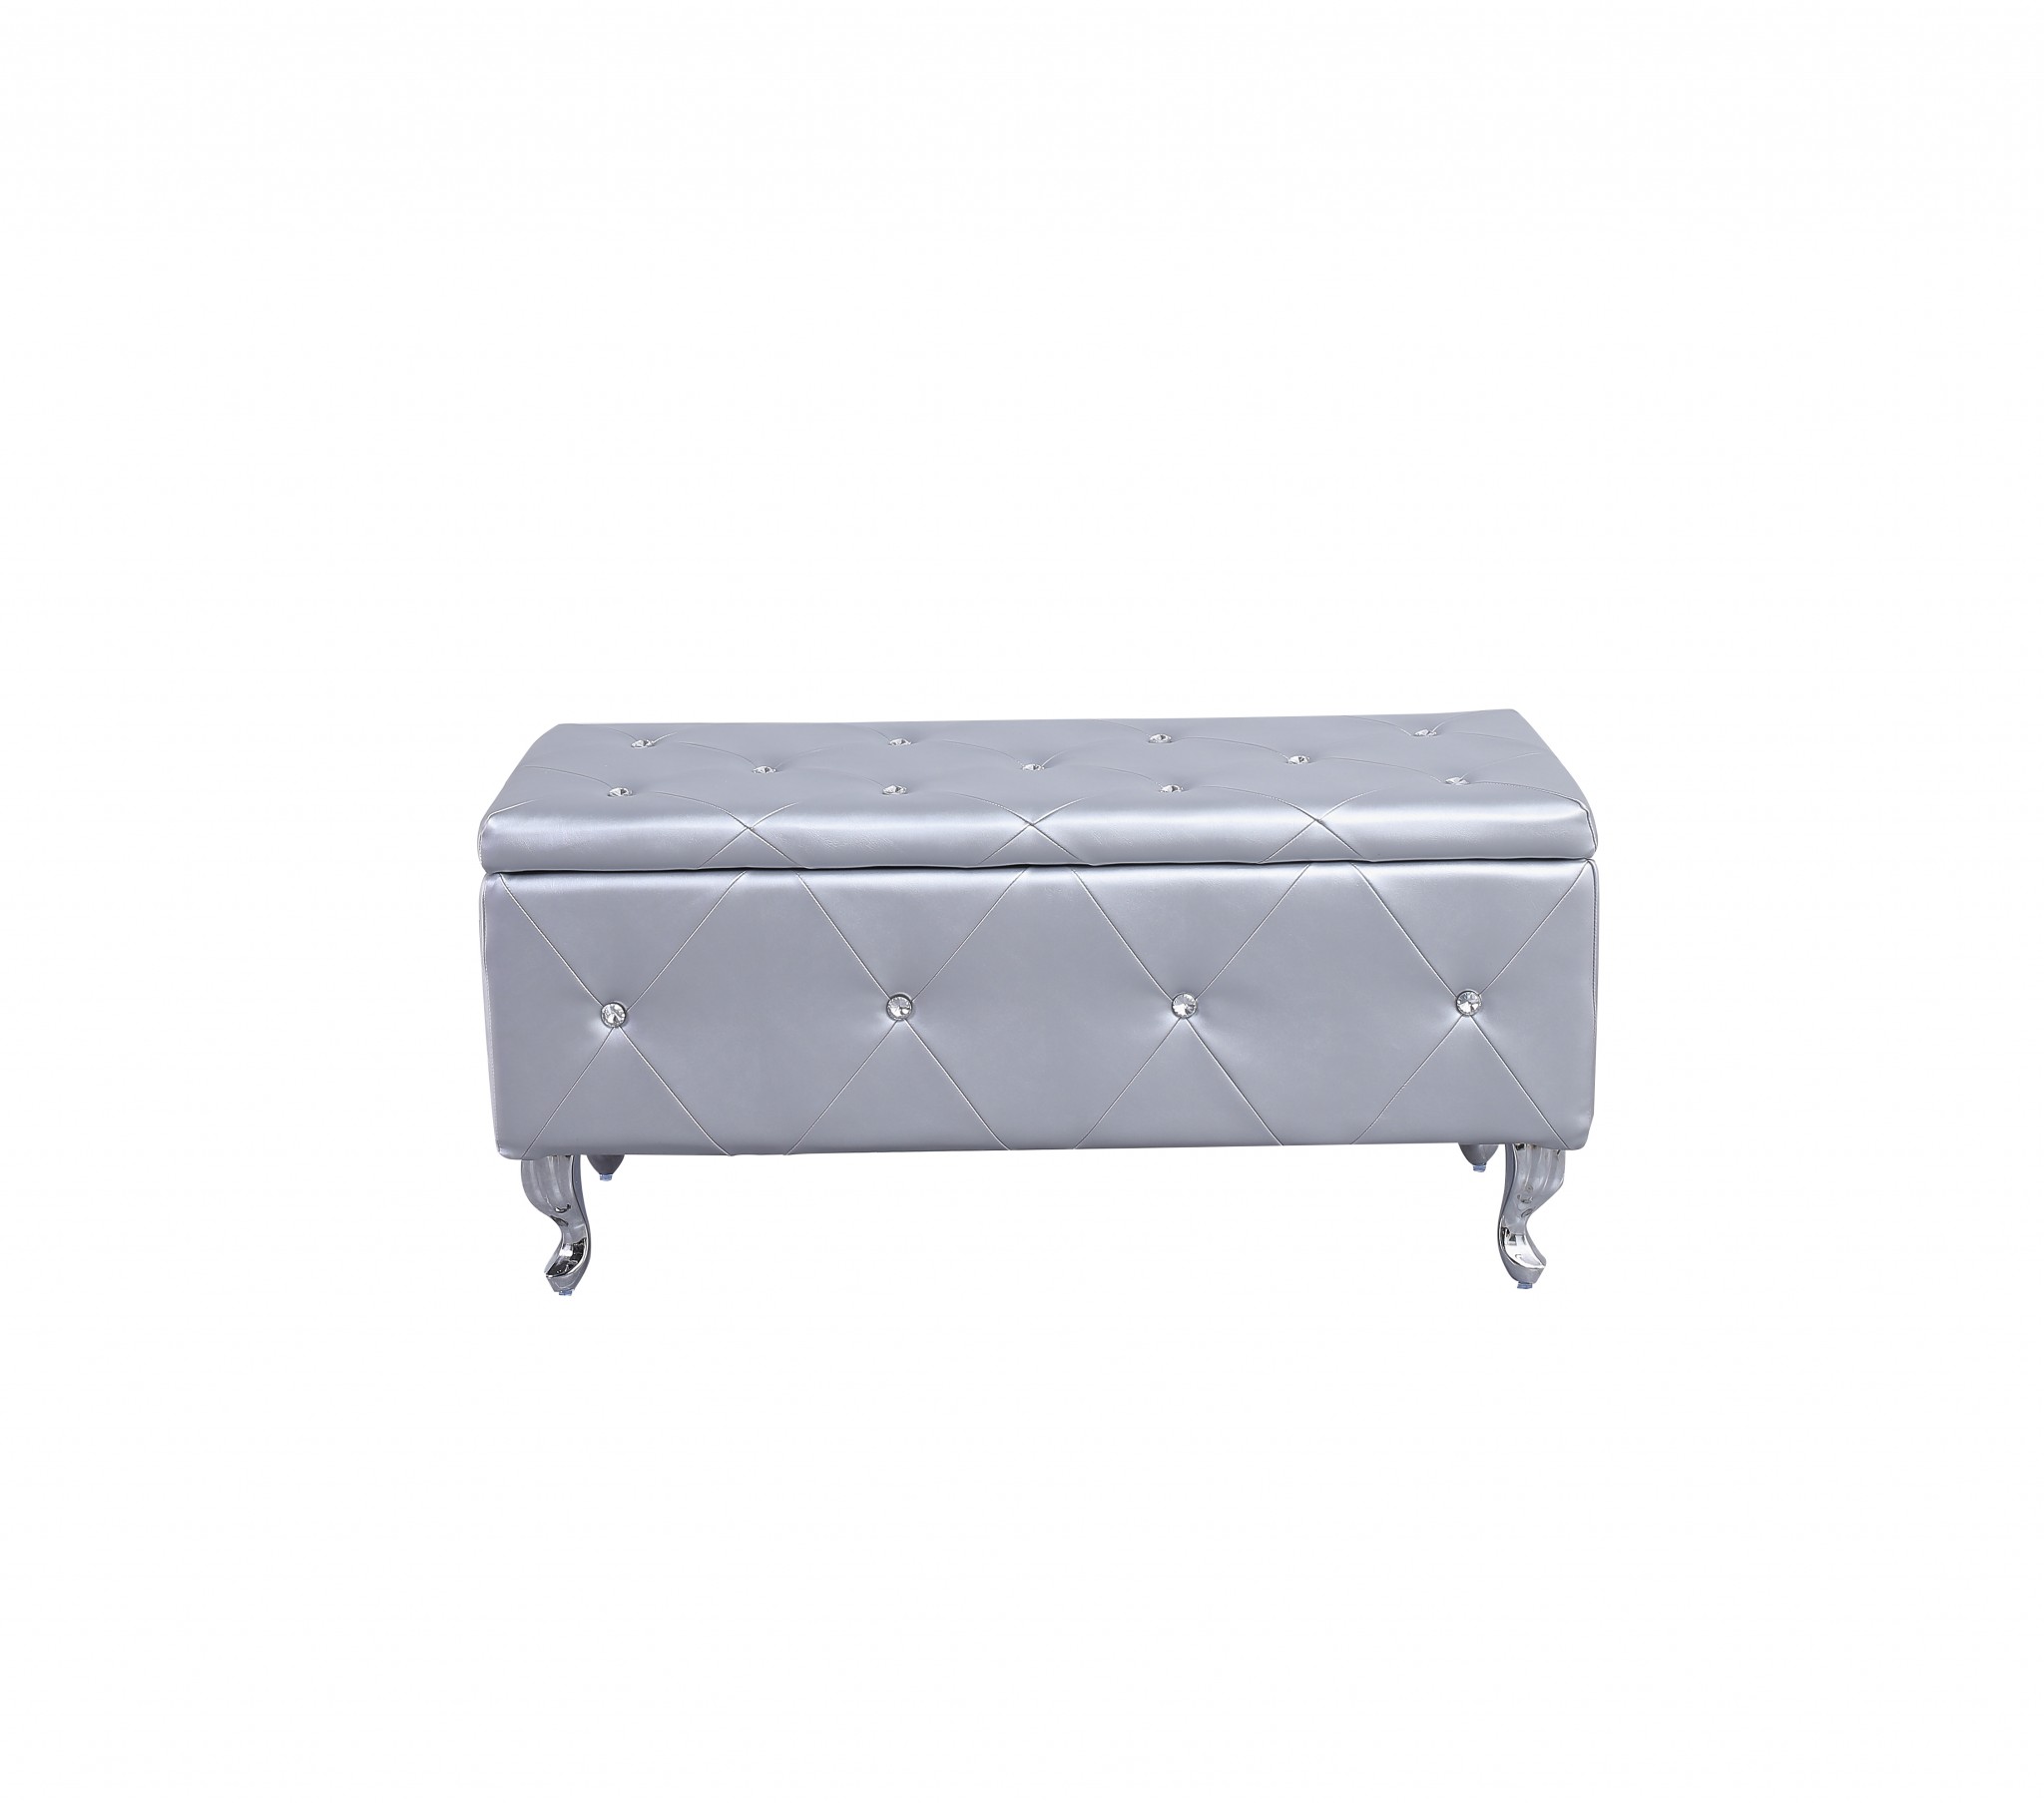 Silver Tufted Hard Wood Storage Bench